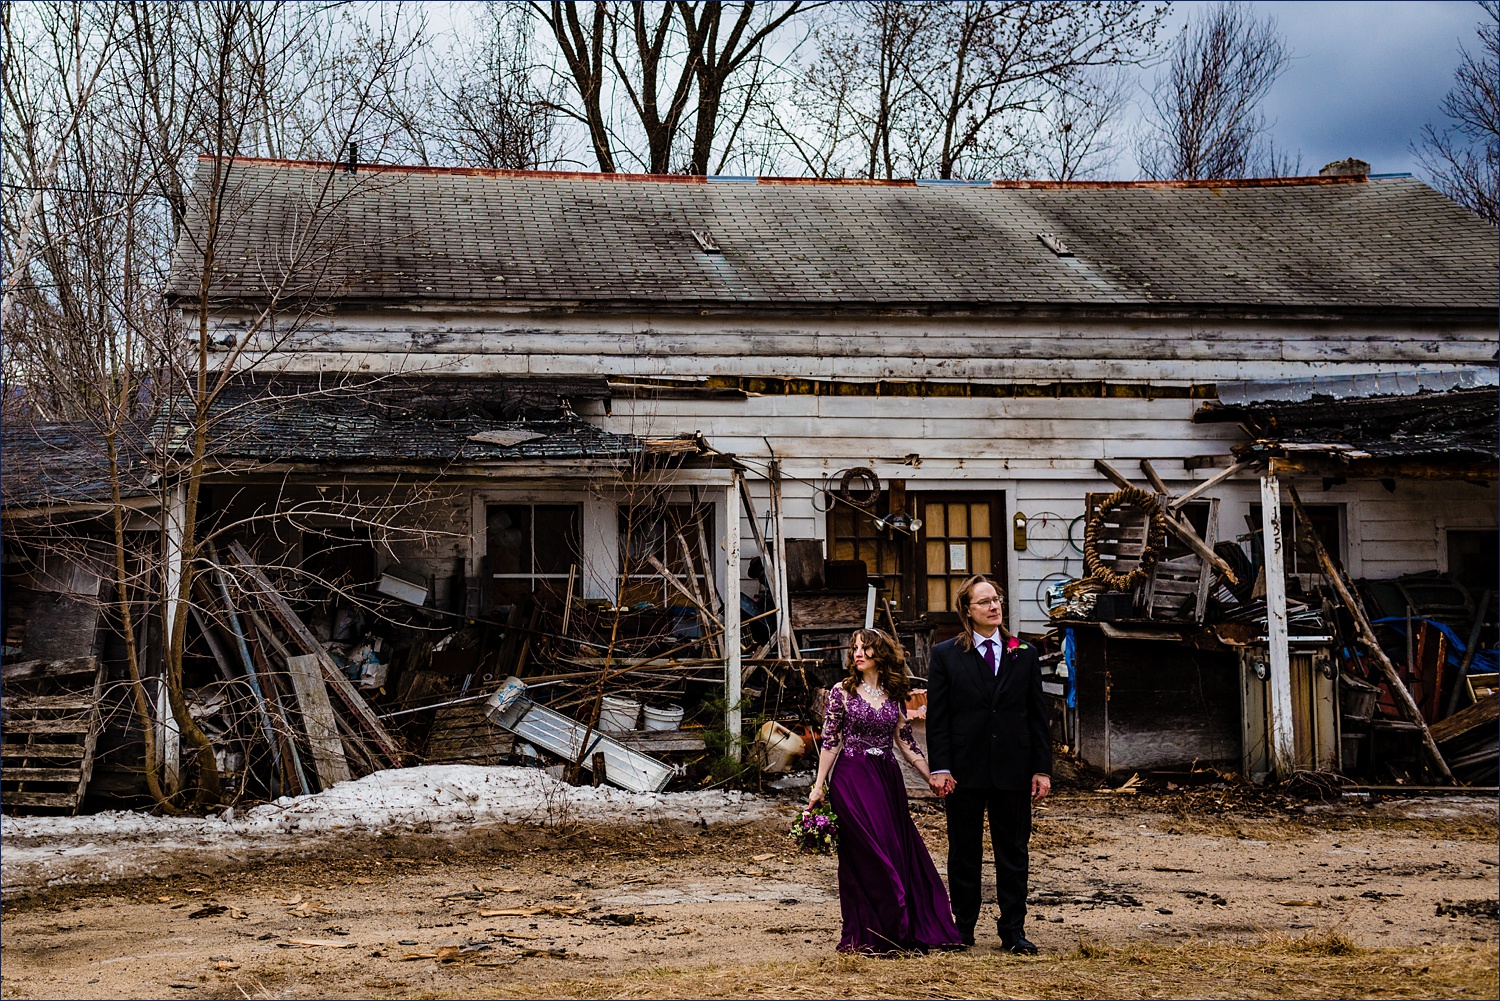 The newlyweds stand in front of a run down home along the road in Jackson, NH after eloping